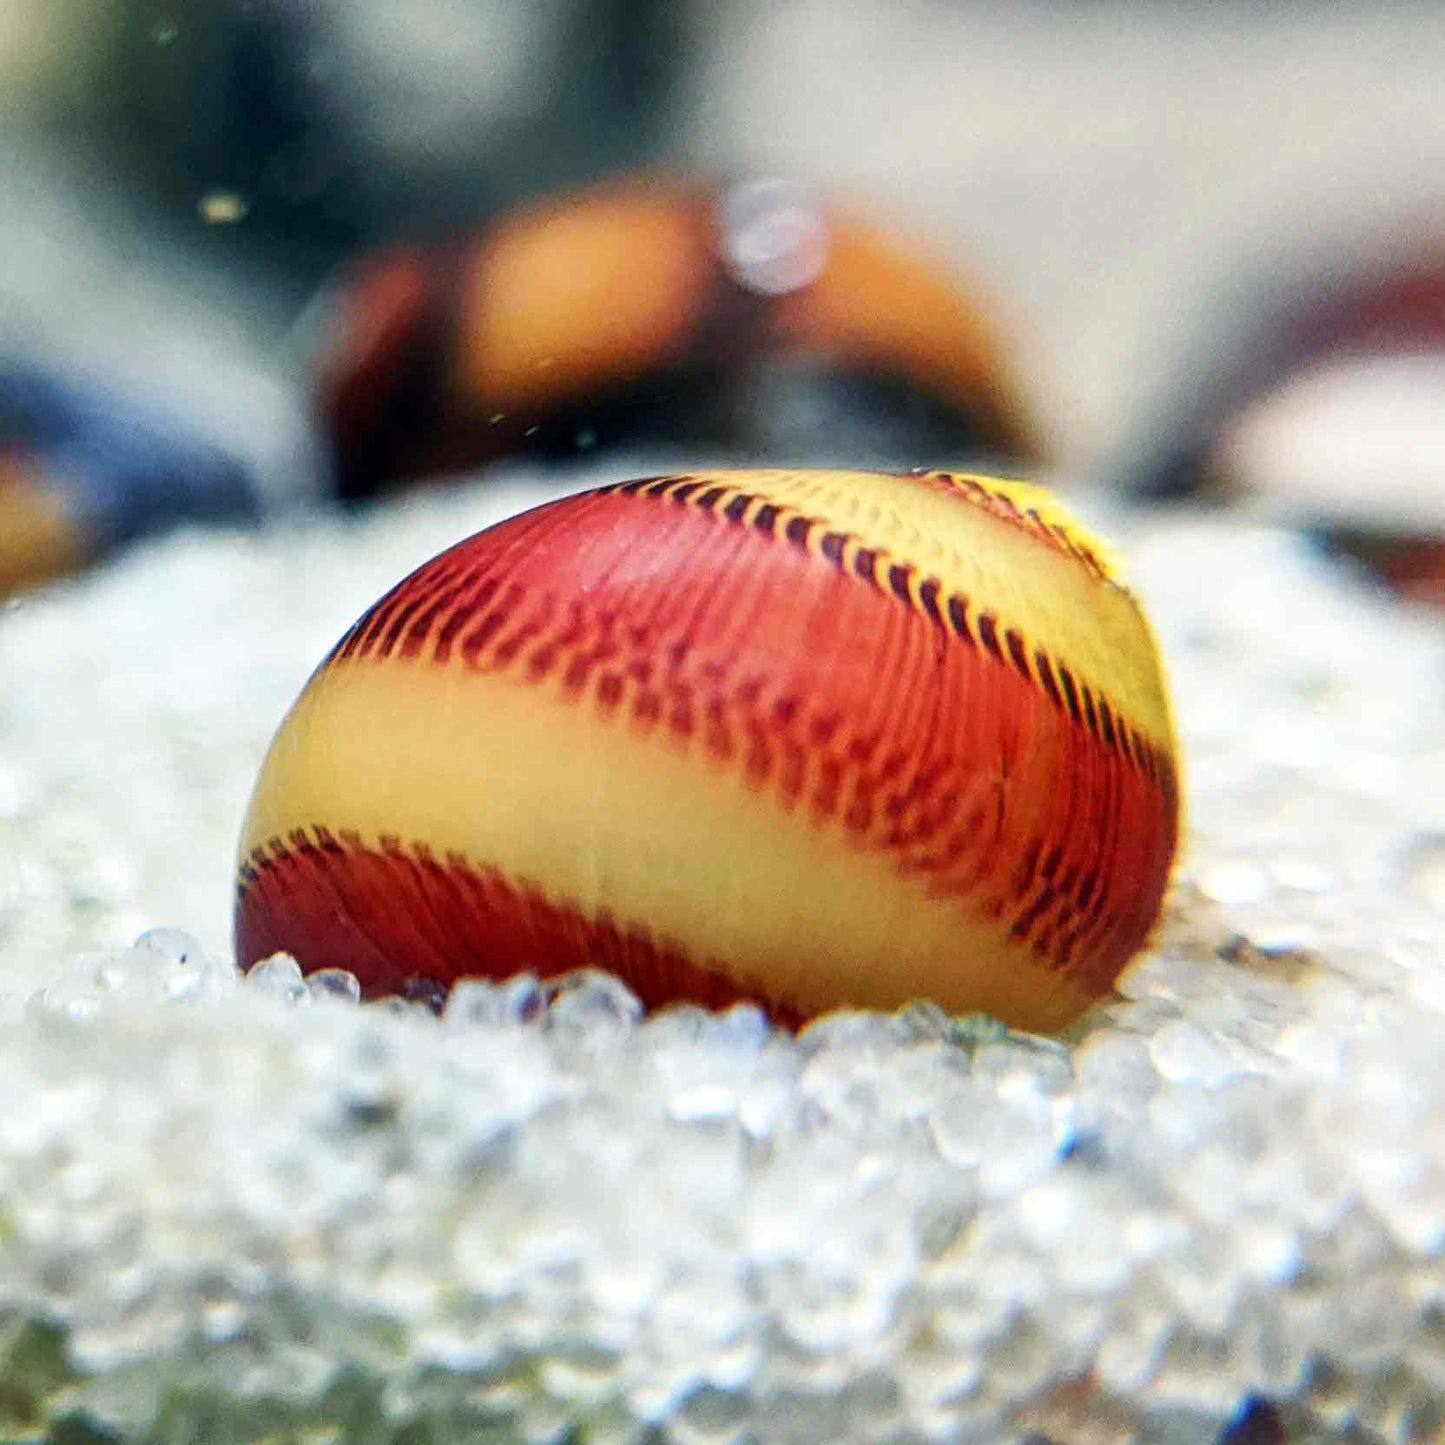 Colorful red racer nerite snail.